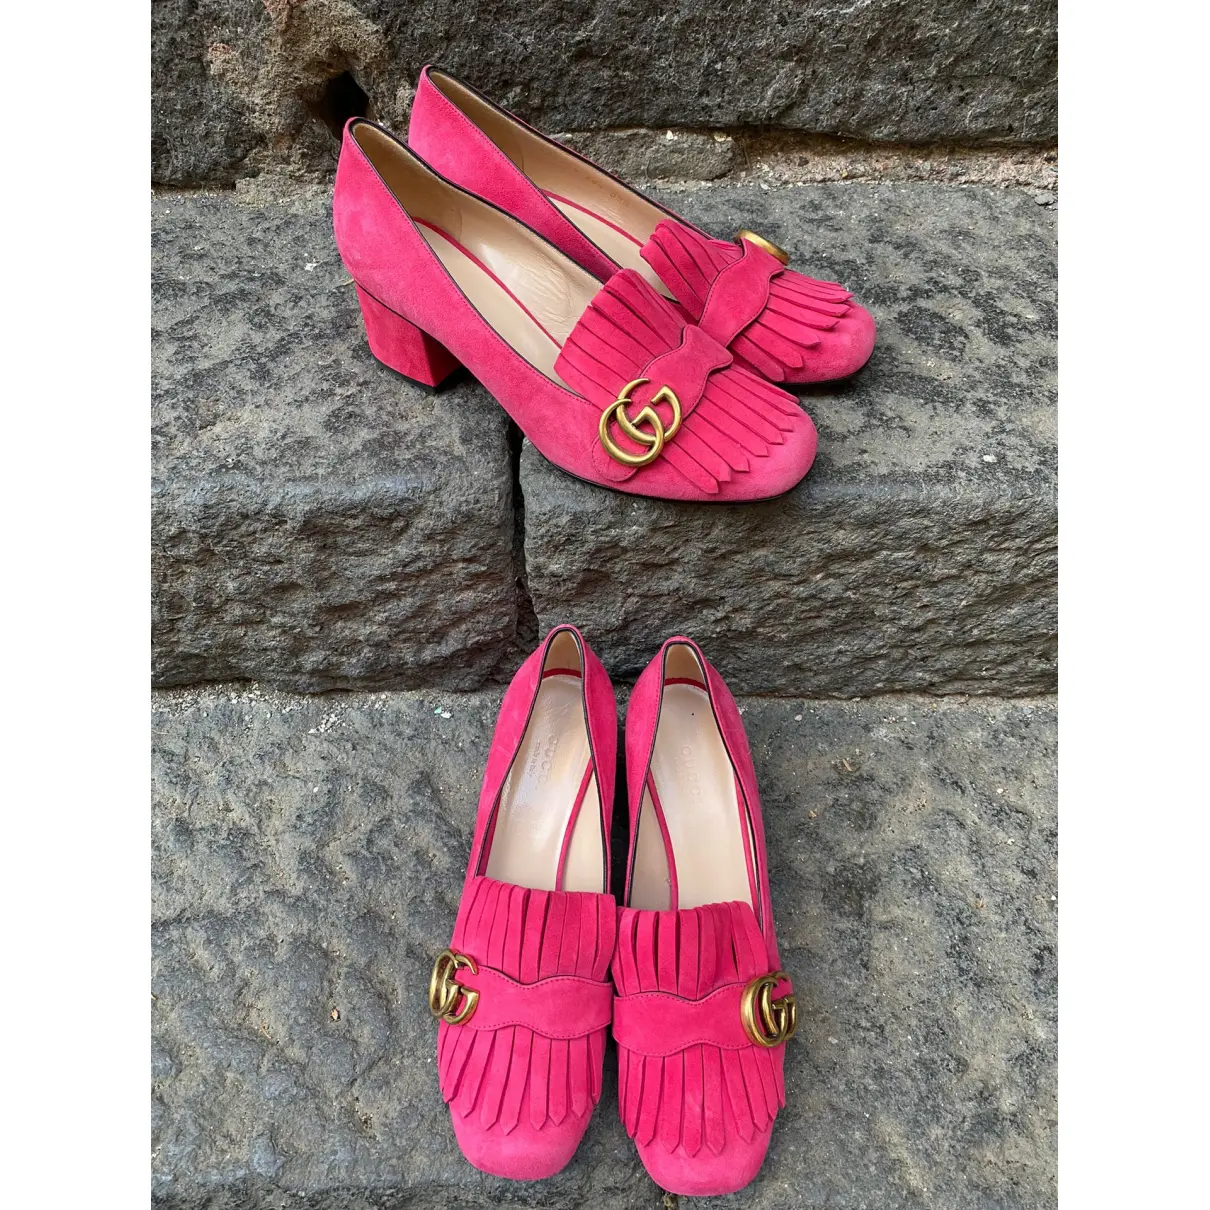 Buy Gucci Marmont flats online